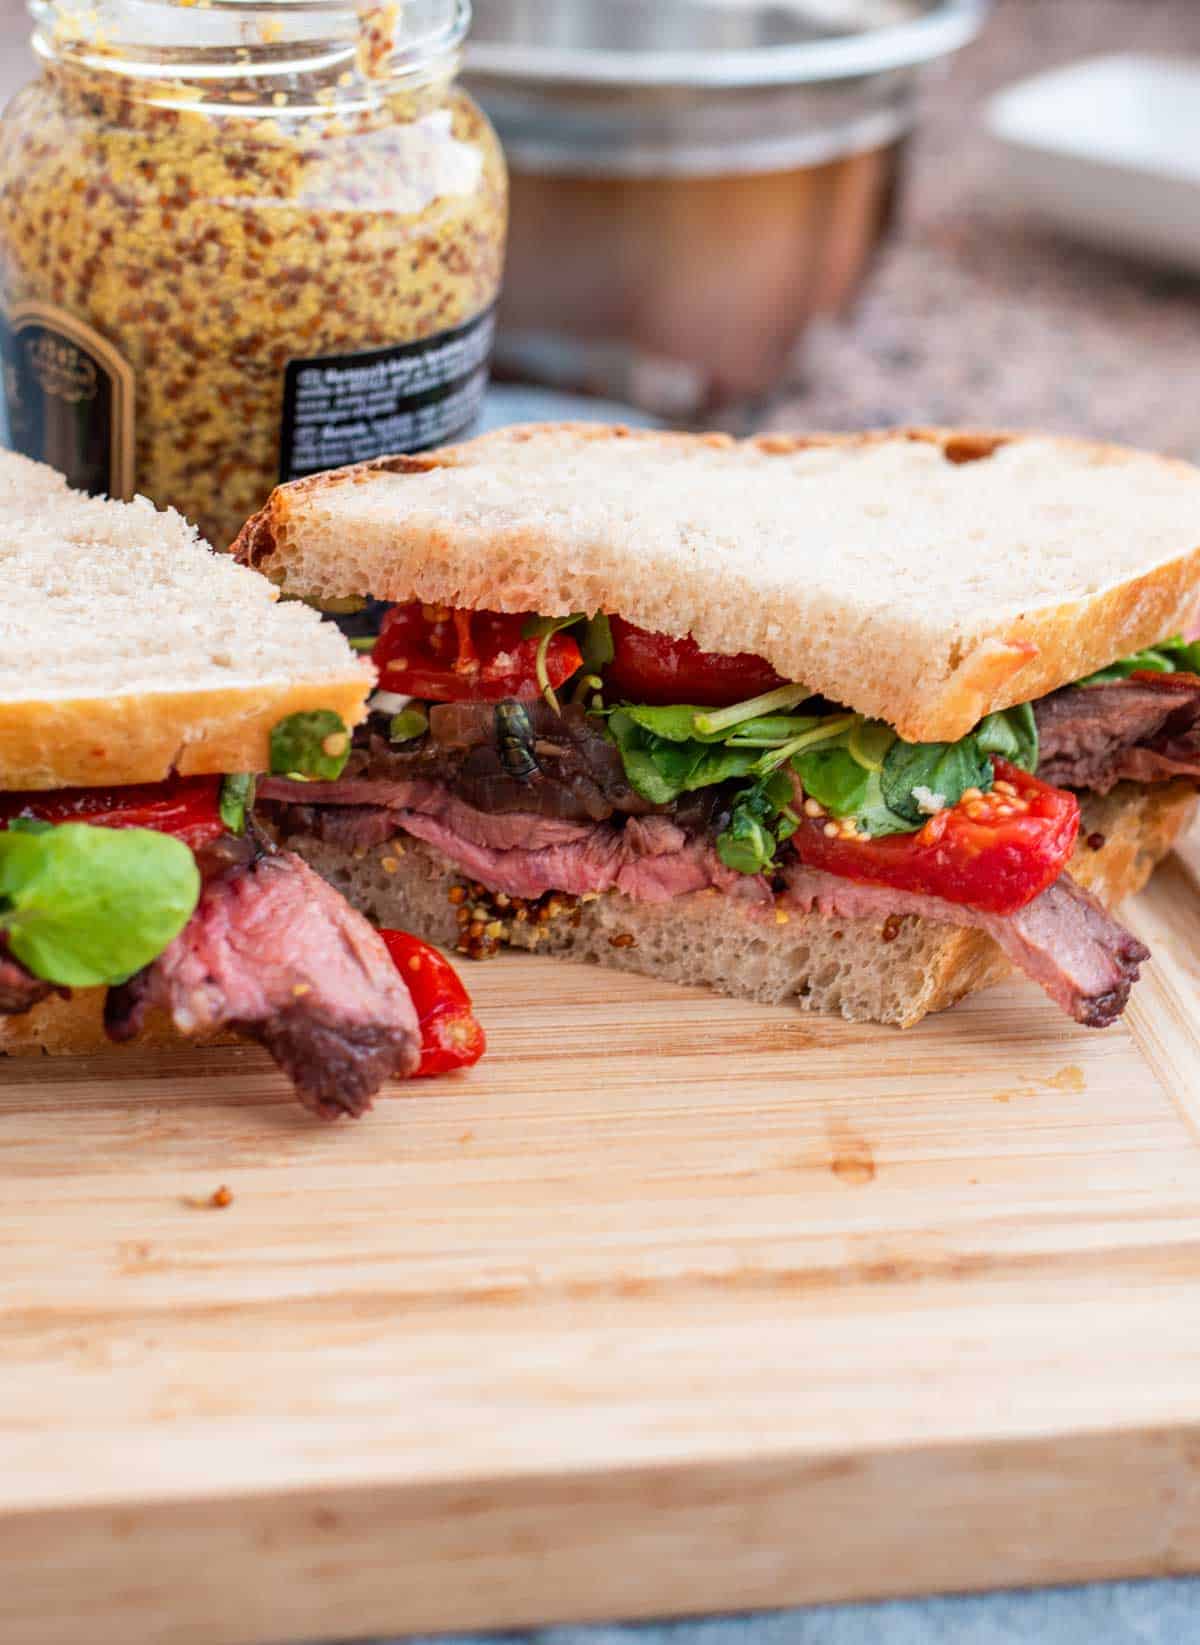 A steak sandwich with arugula and roasted peppers on a wooden cutting board, with a jar of mustard in the background.